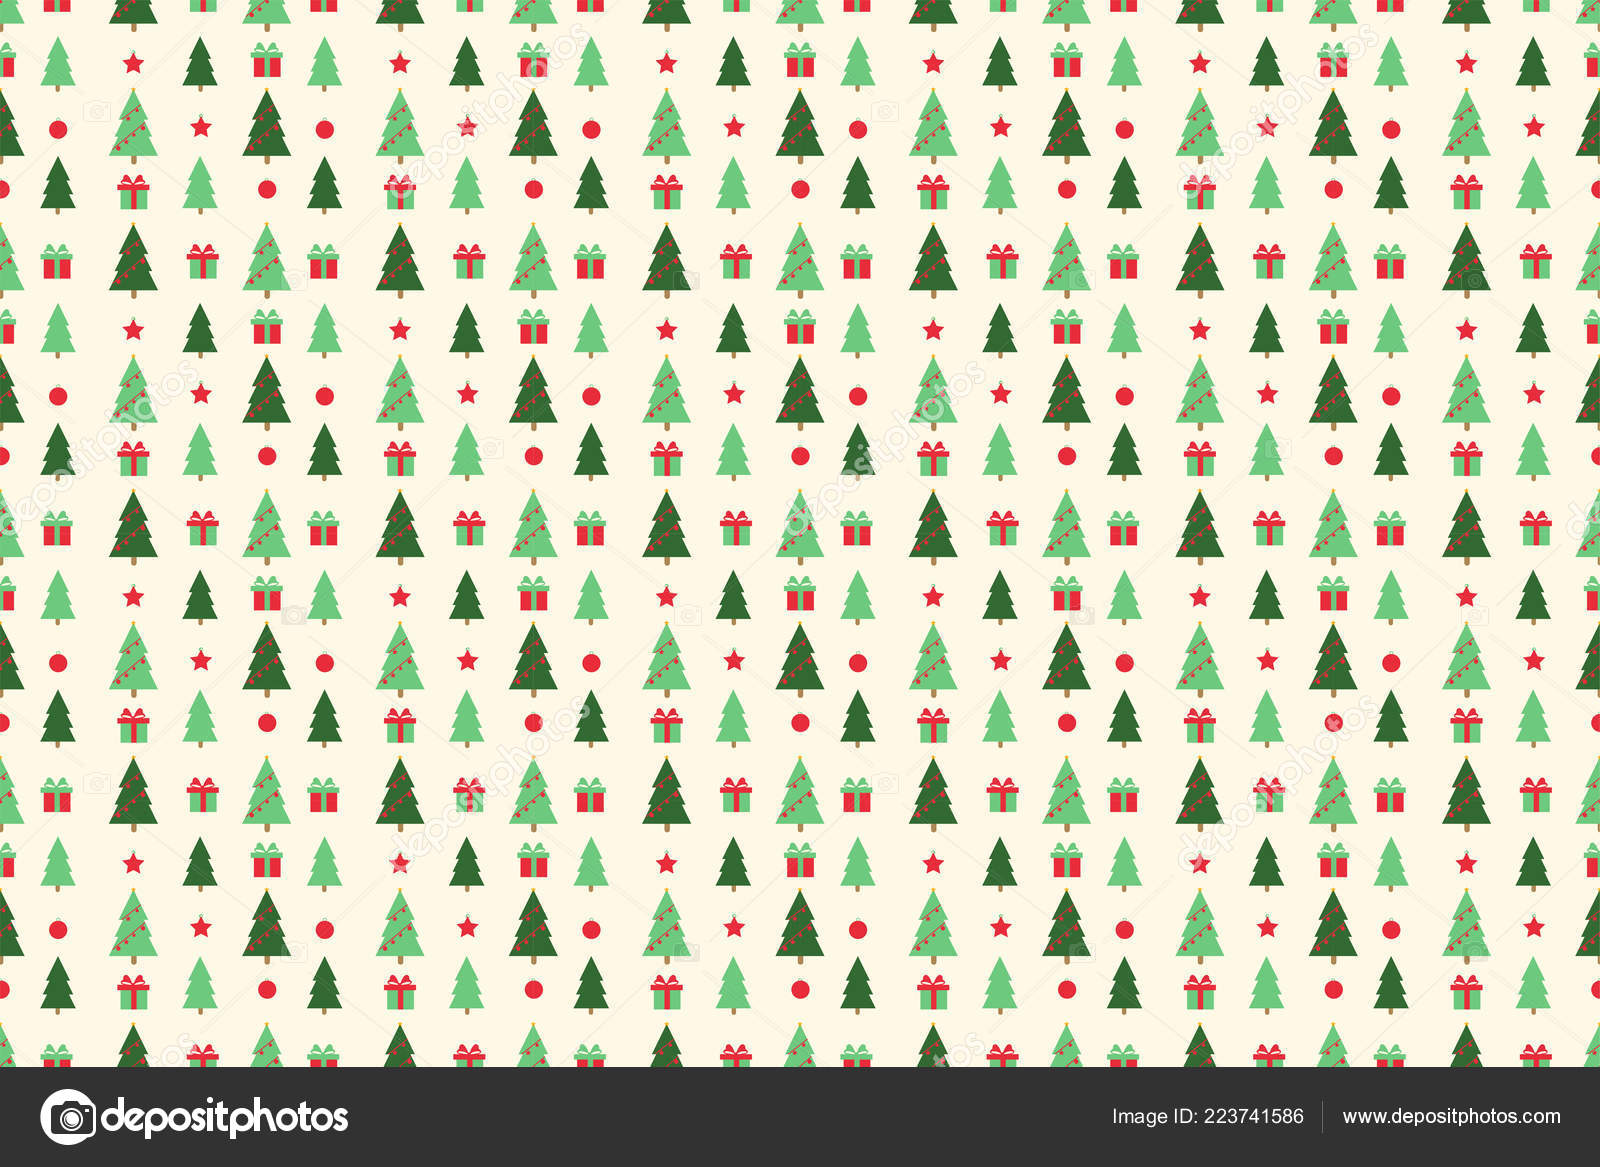 Christmas Patterned Wrapping Paper